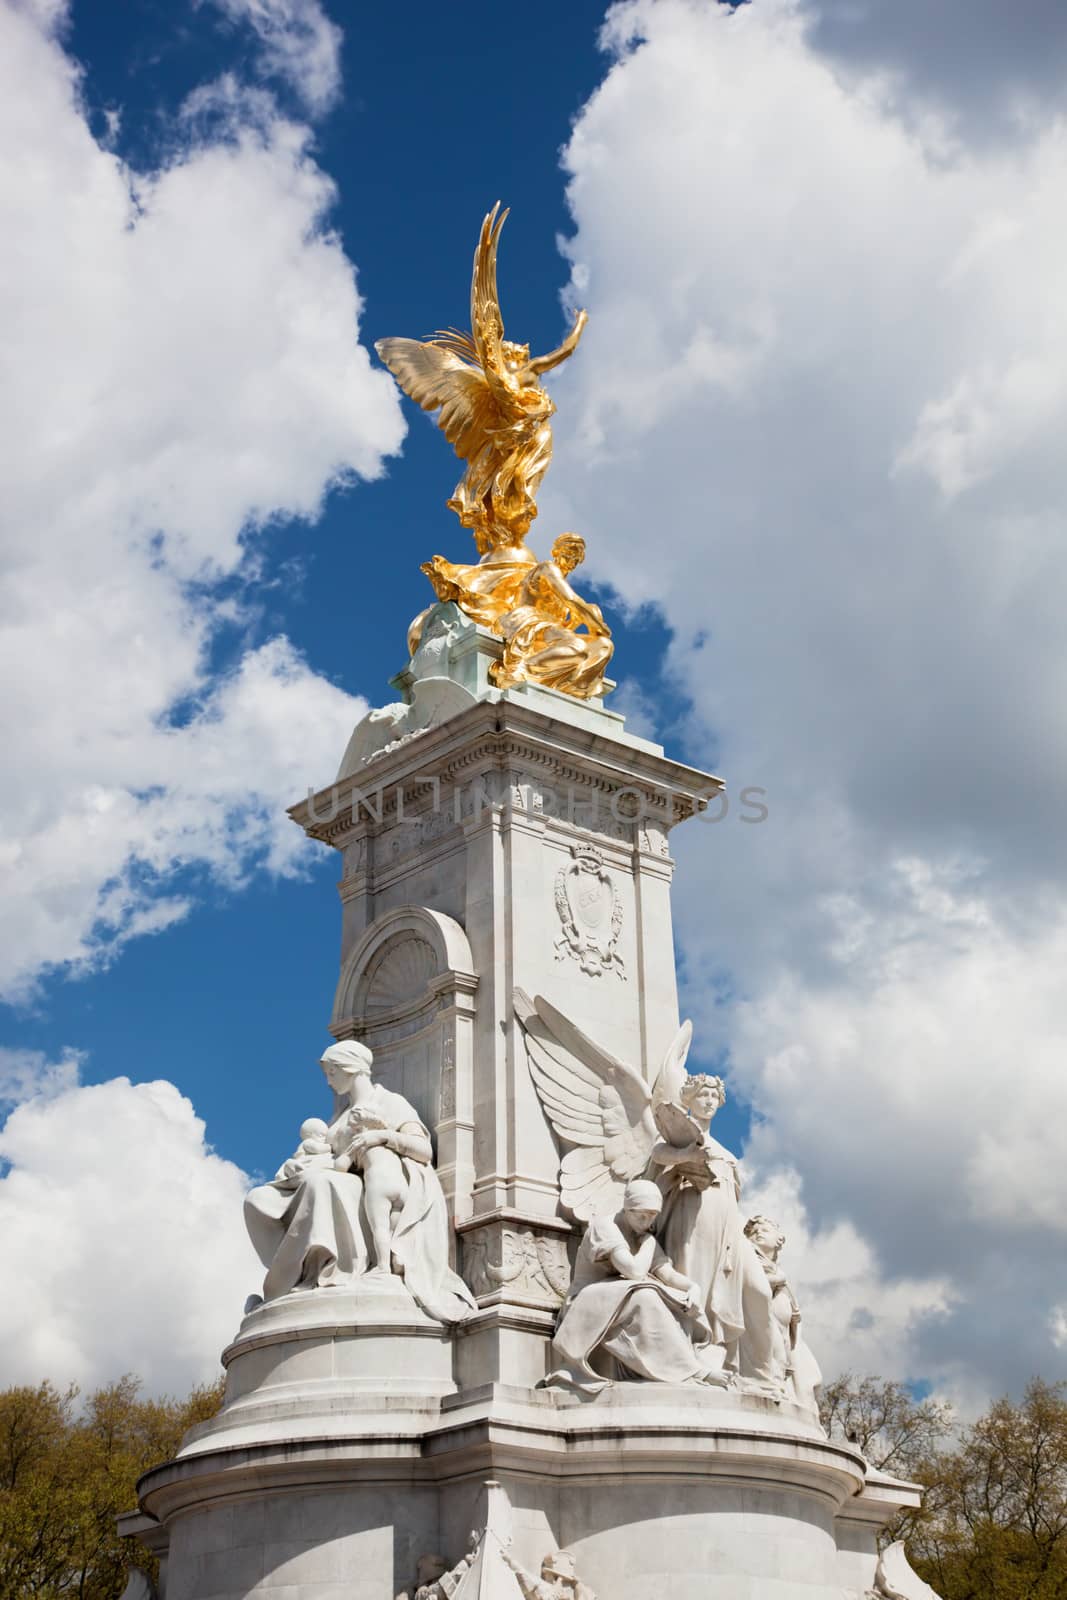 Victoria Memorial next to Buckingham Palace in London, the UK